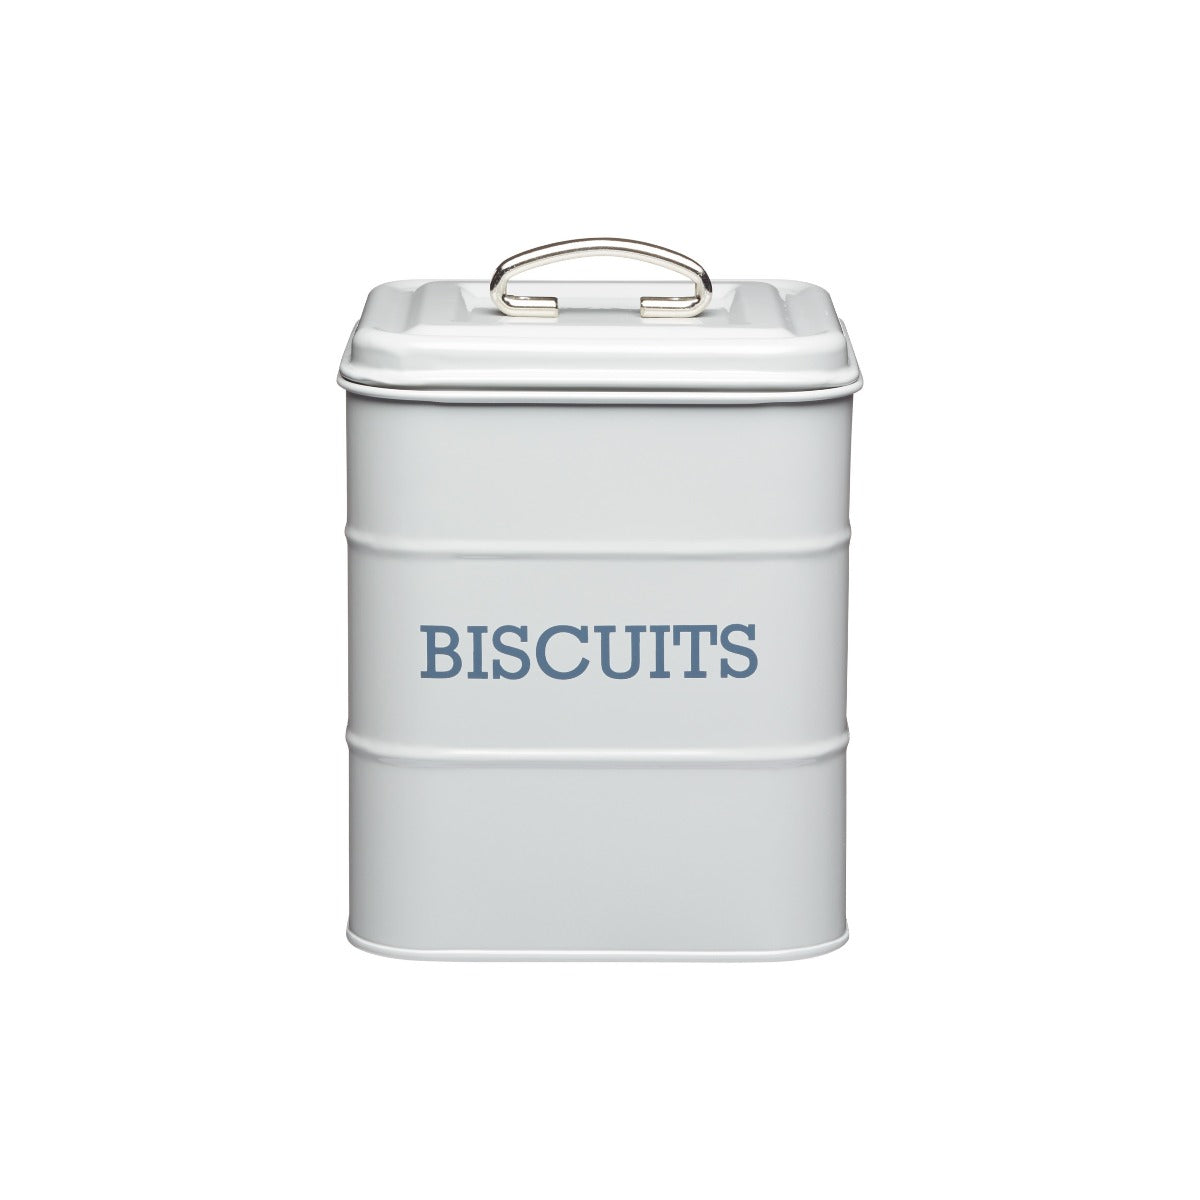 Living Nostalgia by KitchenCraft French Grey Biscuit Tin